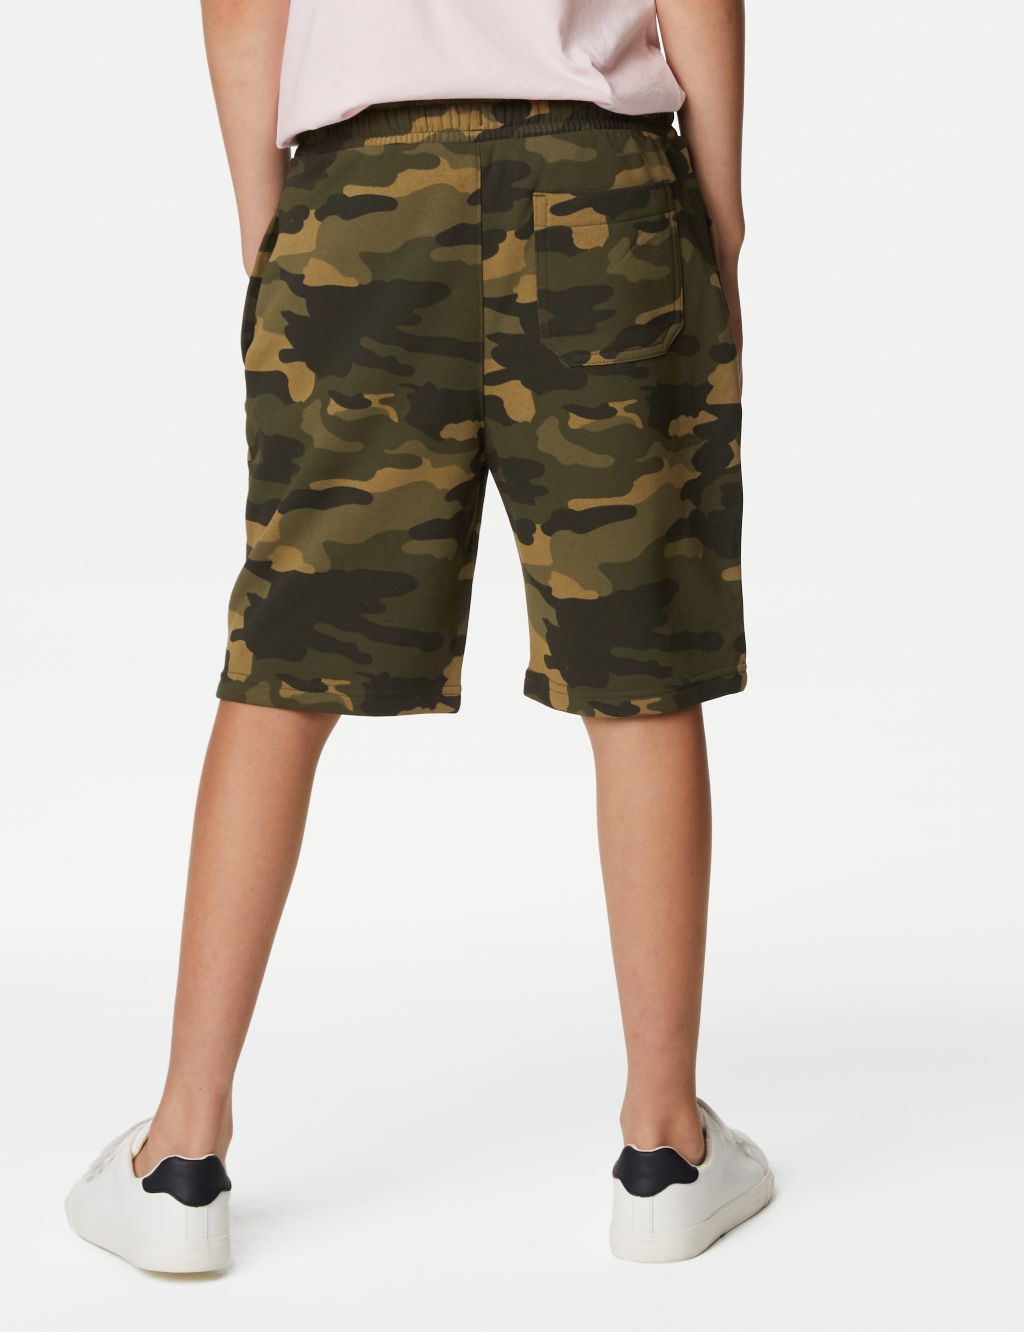 Cotton Rich Camouflage Shorts (6-16 Yrs) image 4